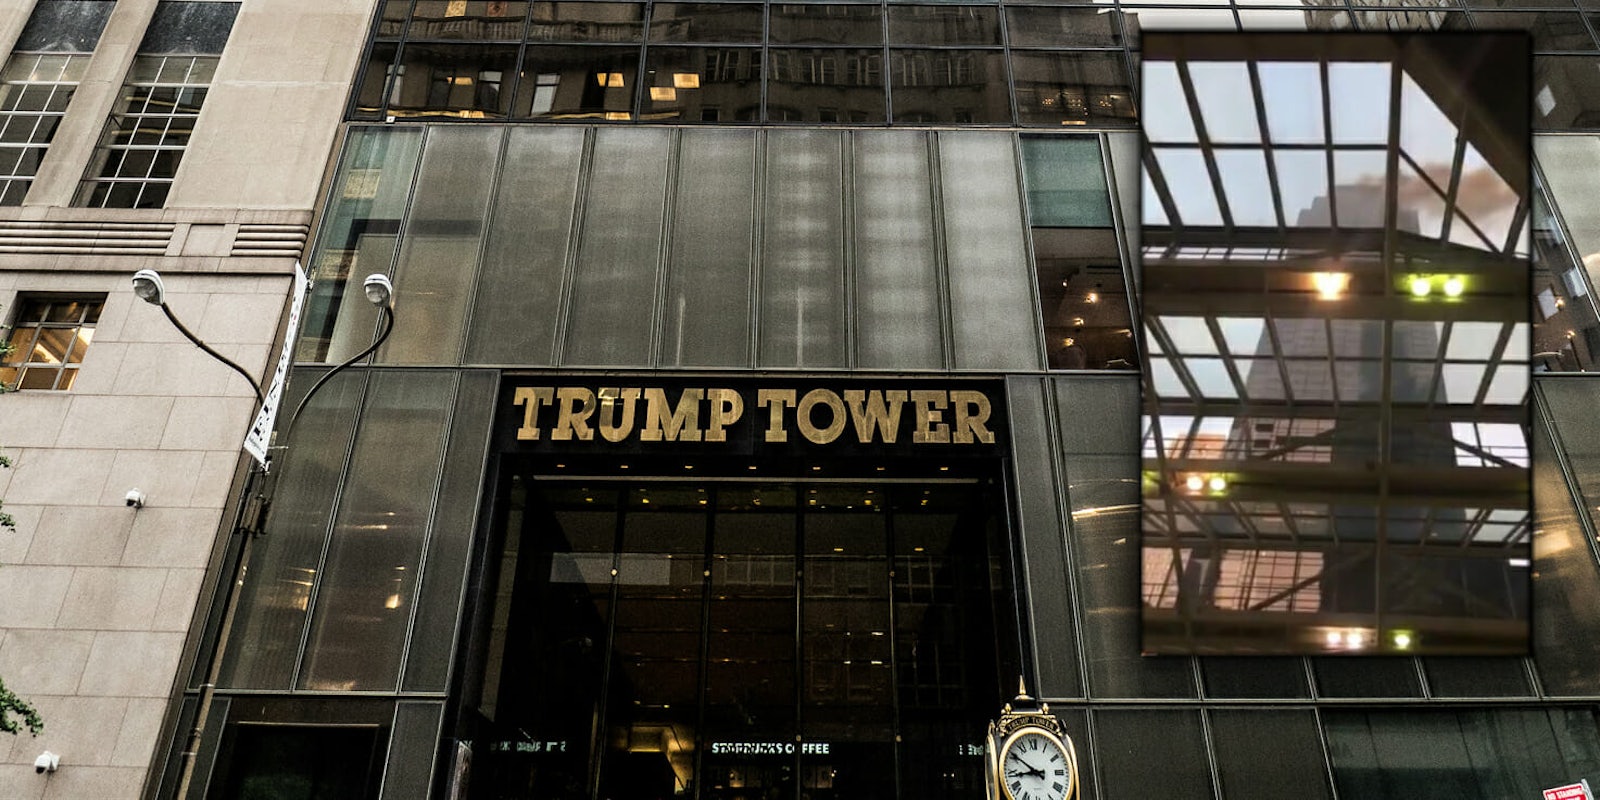 A fire broke out at Trump Tower in New York on Monday. It sparked conspiracy theories and jokes.